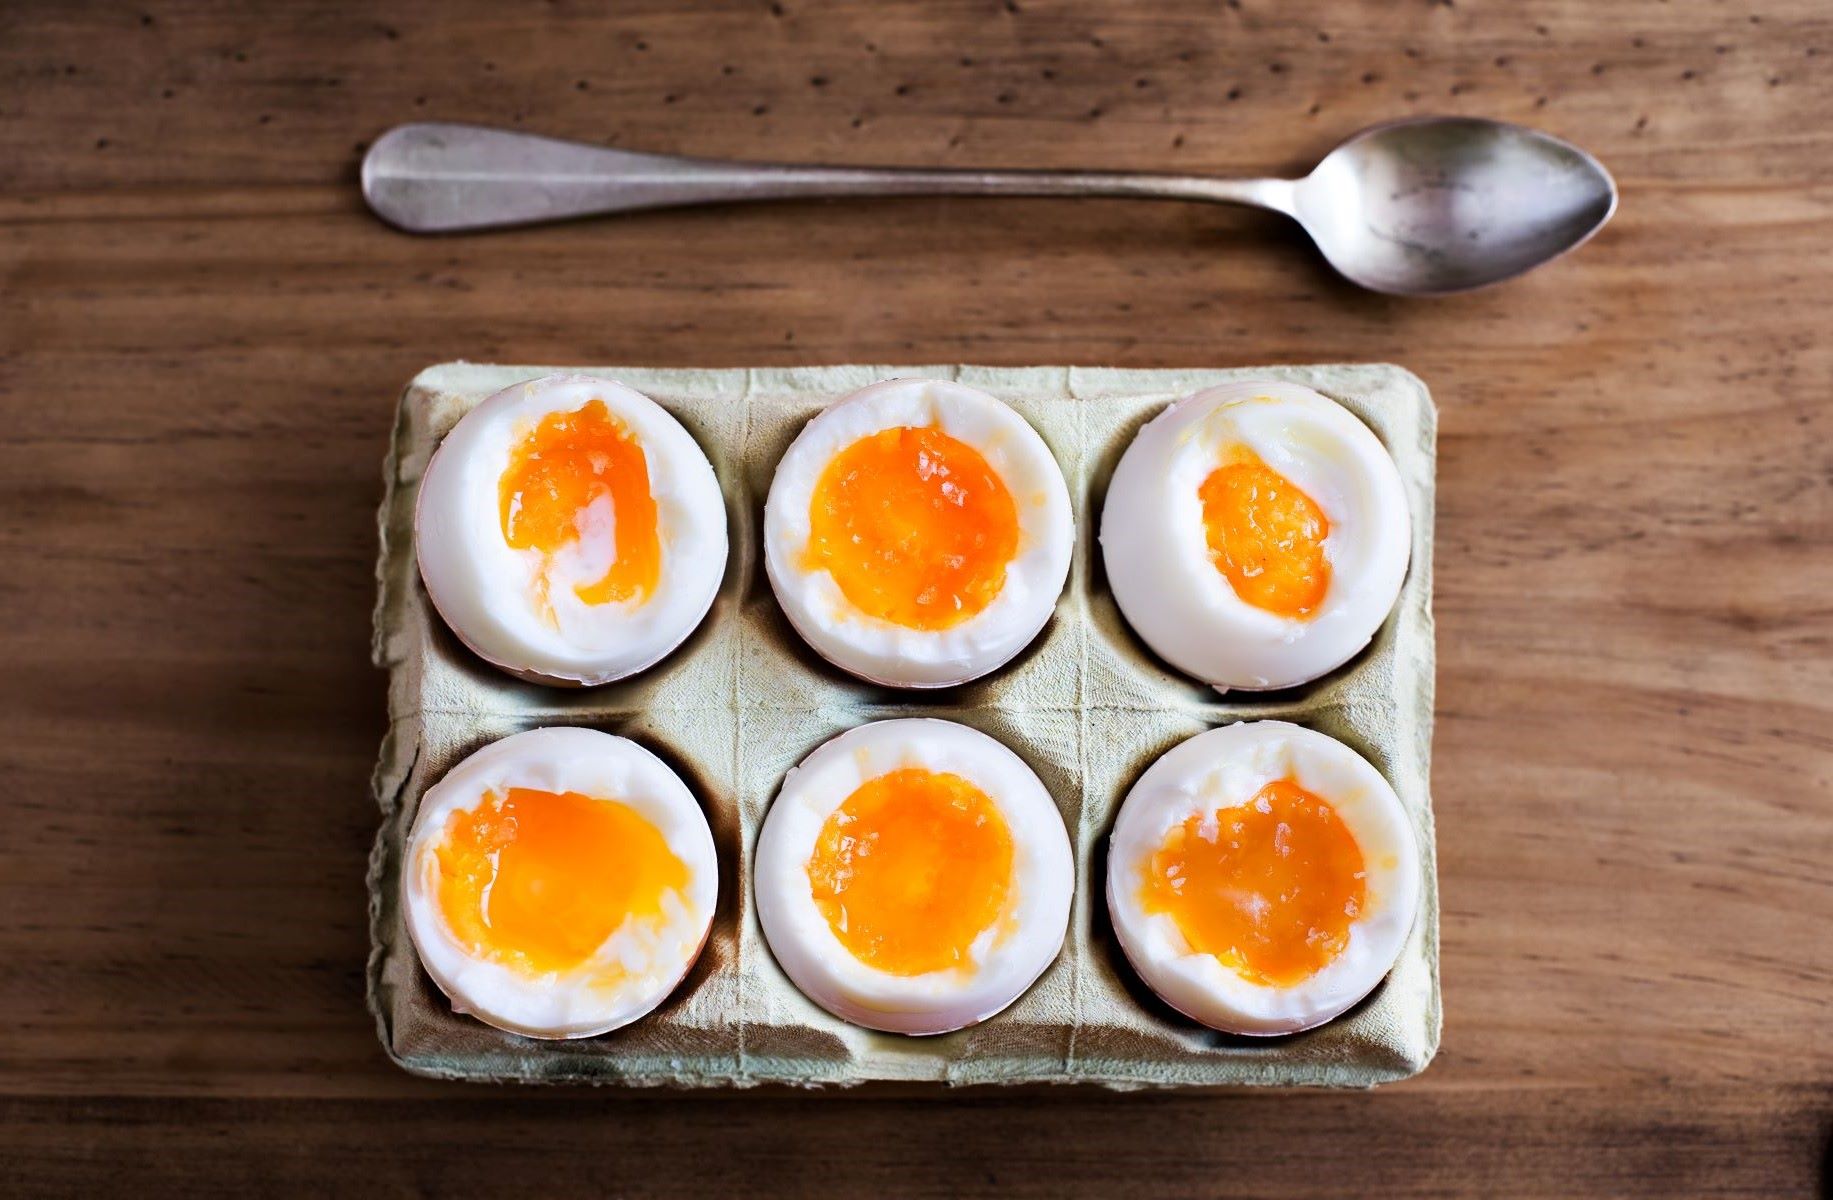 How To Reheat Boiled Eggs